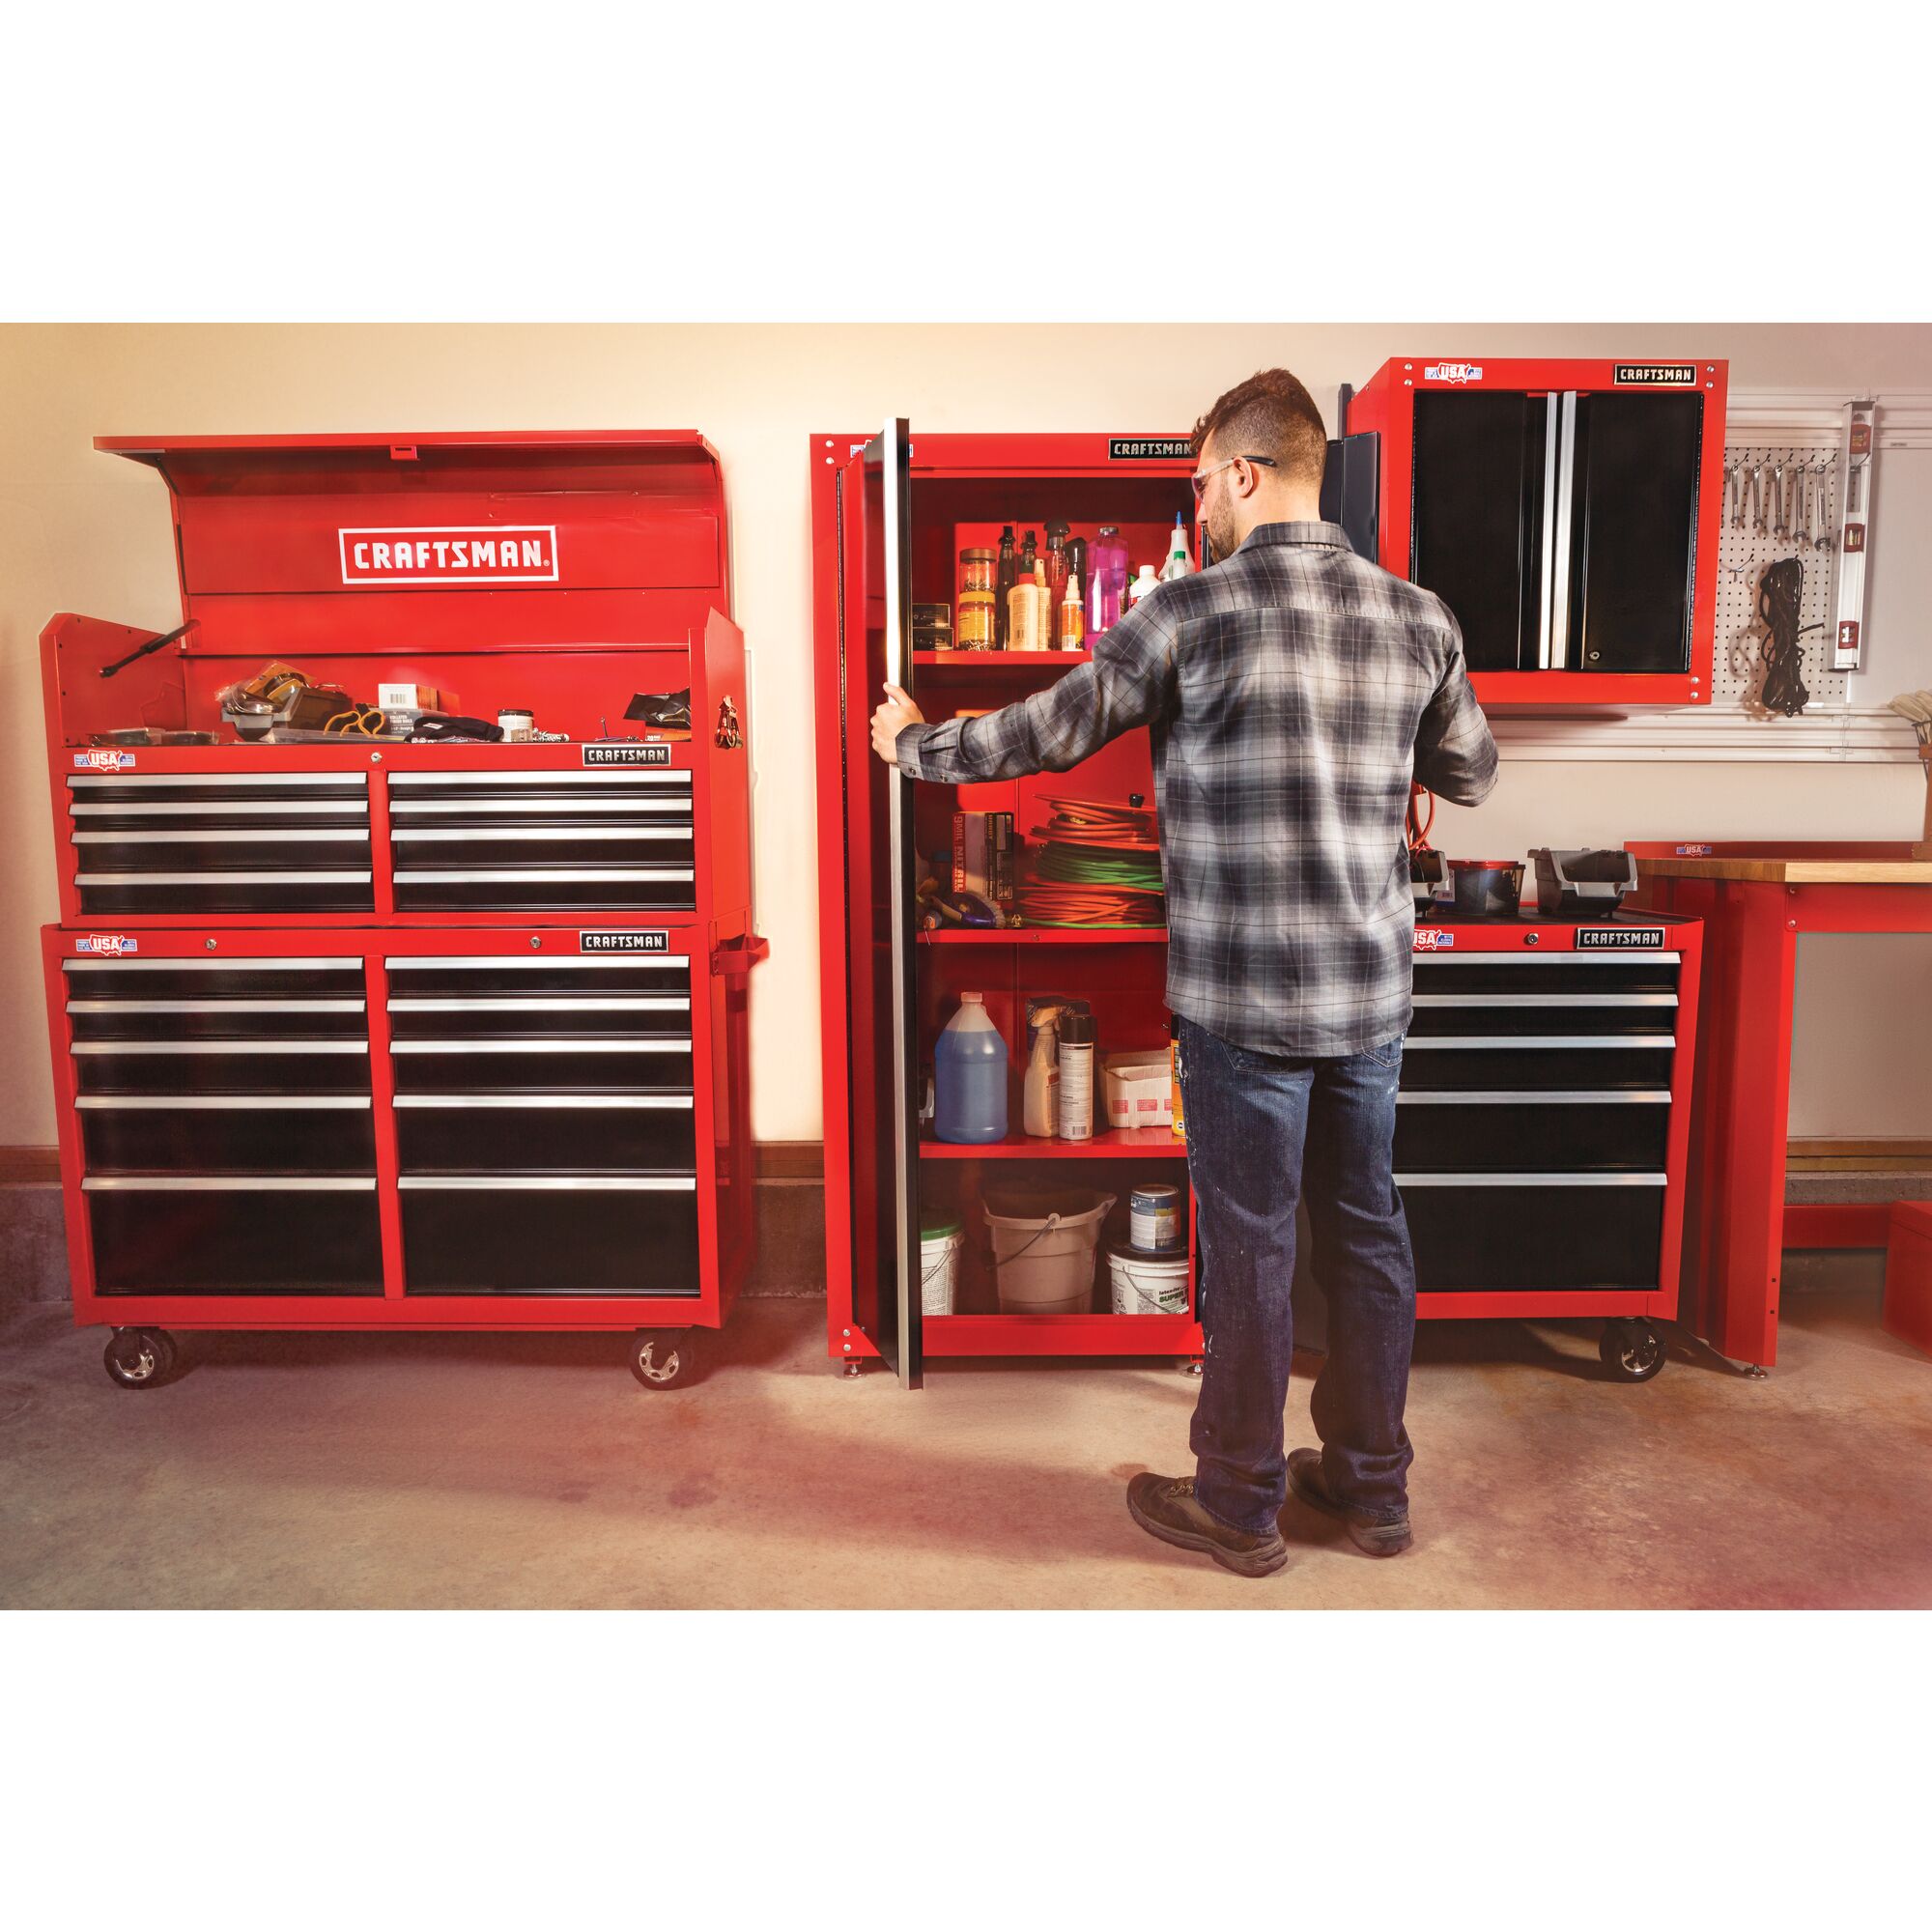 32 inch Wide freestanding tall garage storage cabinet being used by a person to keep items.